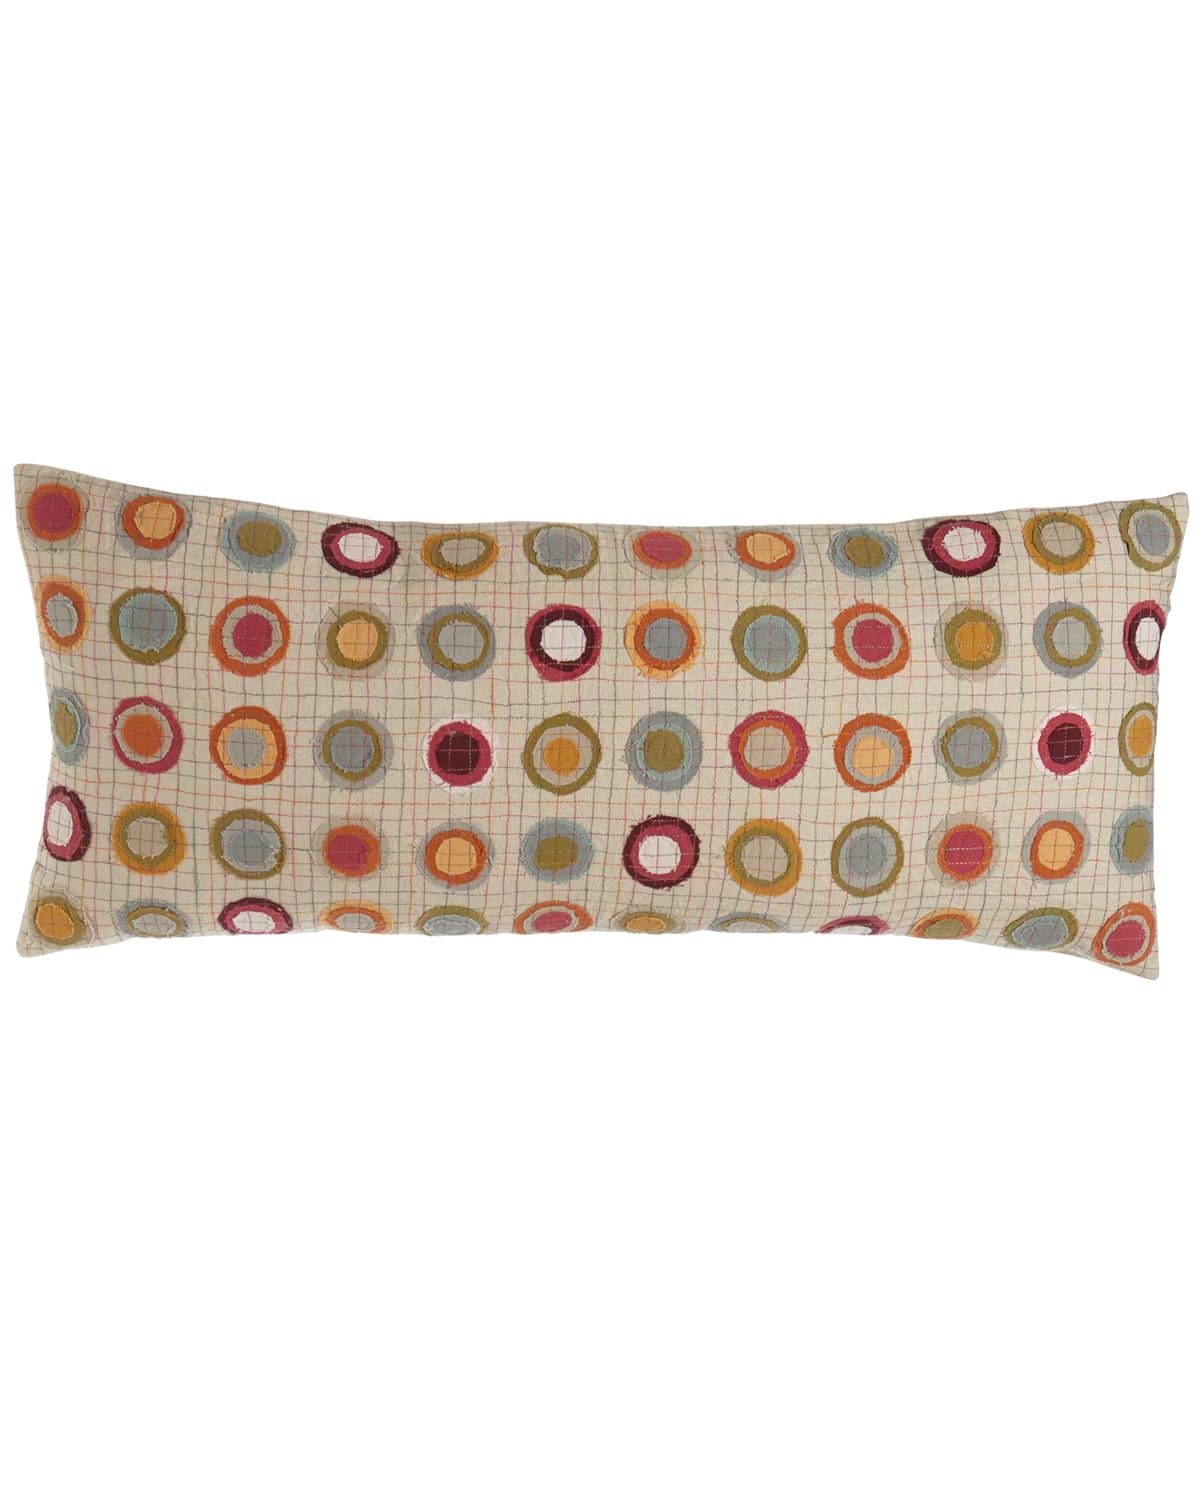 Image Pine Cone Hill Veva Pillow with Circle Appliques, 15" x 35"